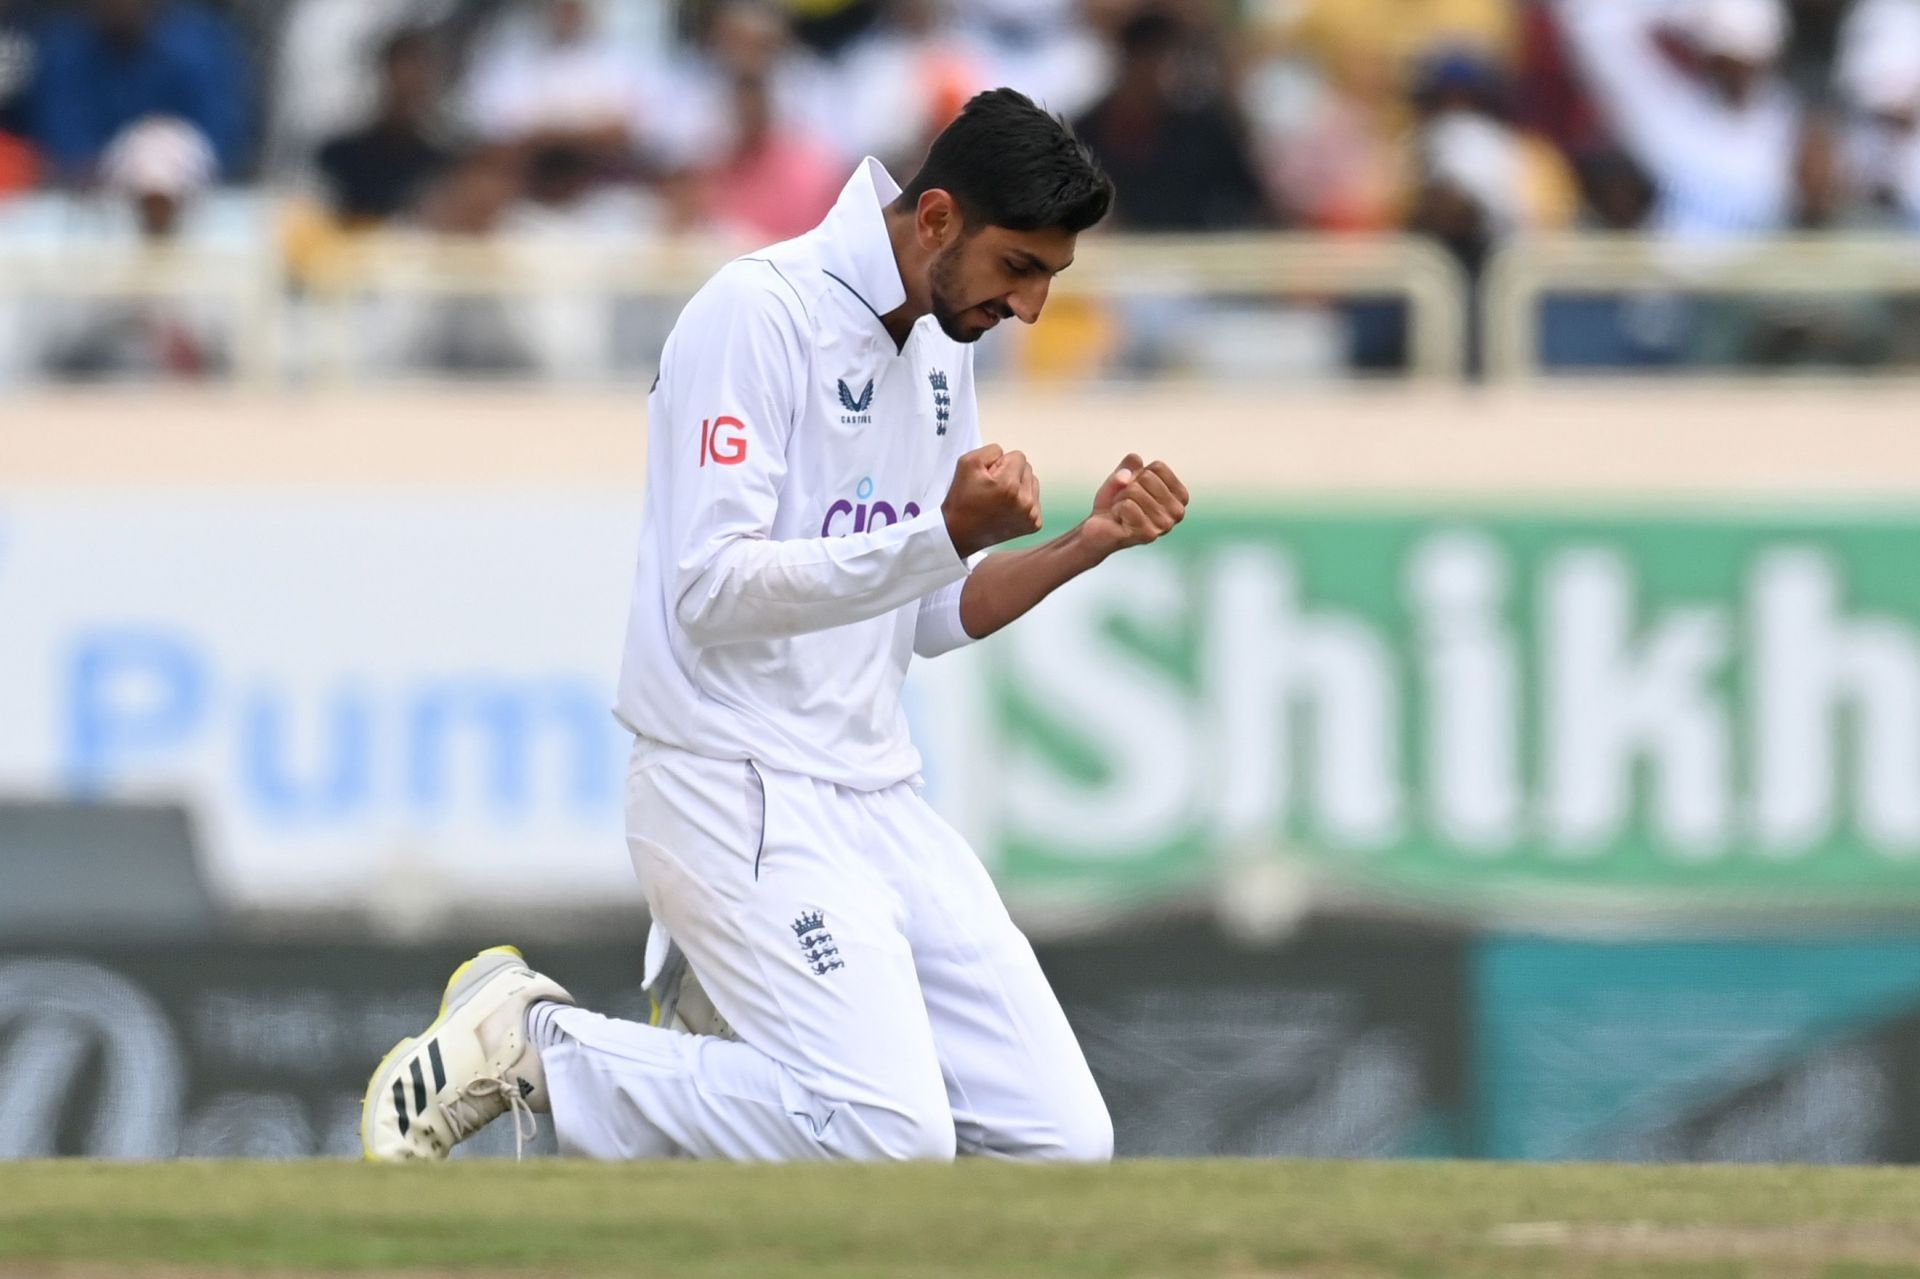 England&rsquo;s young spinners have troubled India&rsquo;s batters. (Pic: Getty Images)